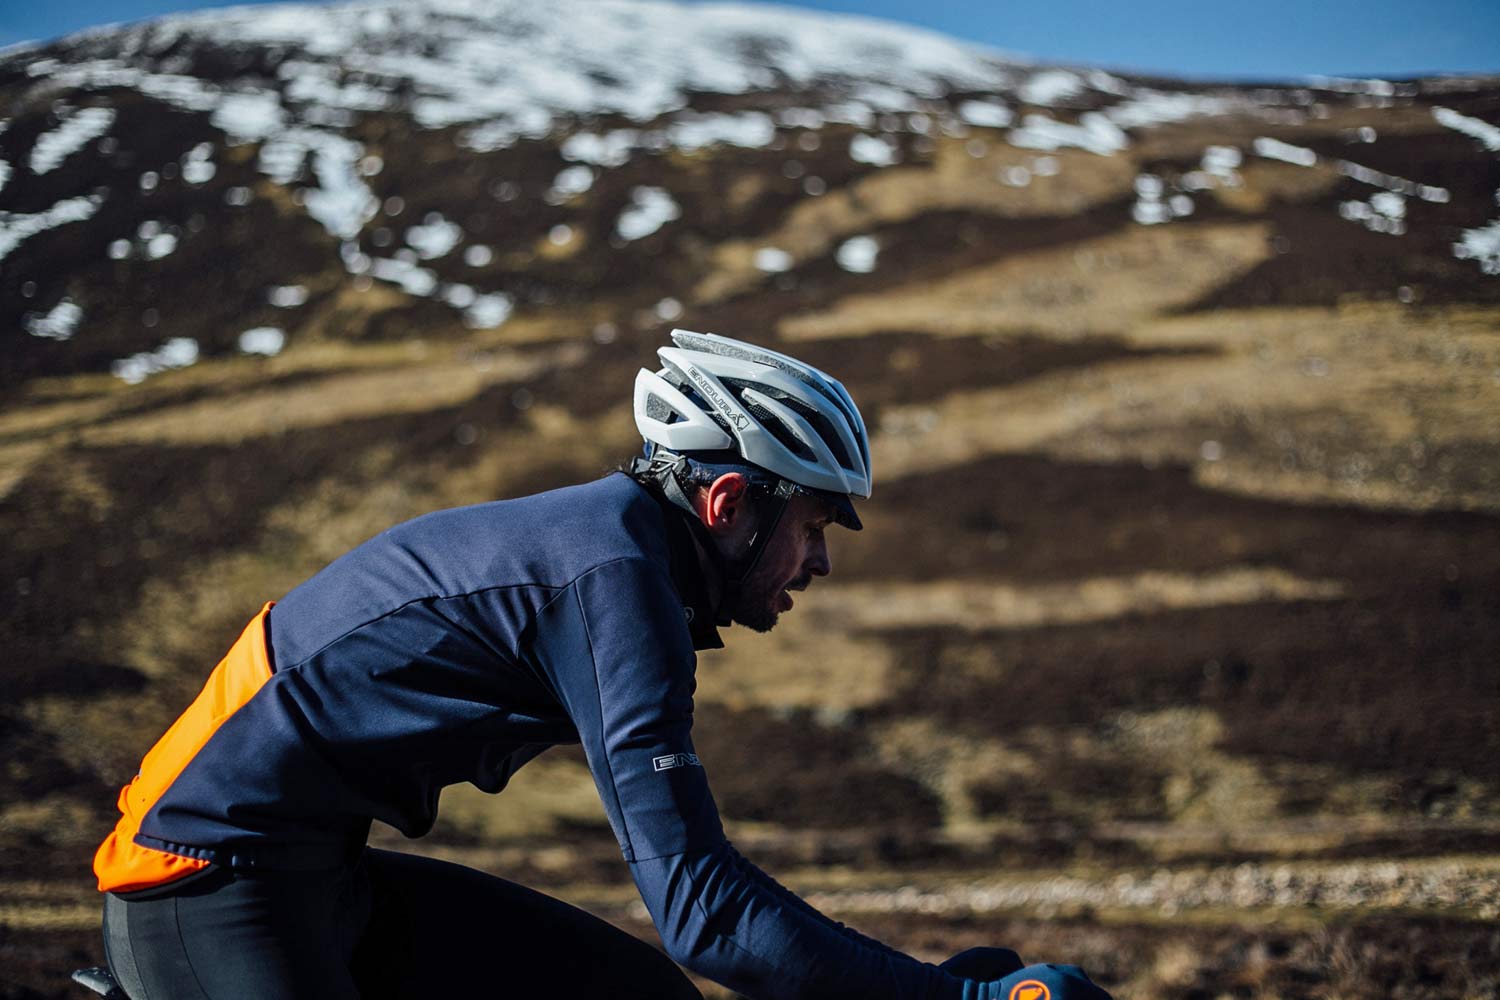 Endura goes Pro SL Thermal to keep riding through winter cold